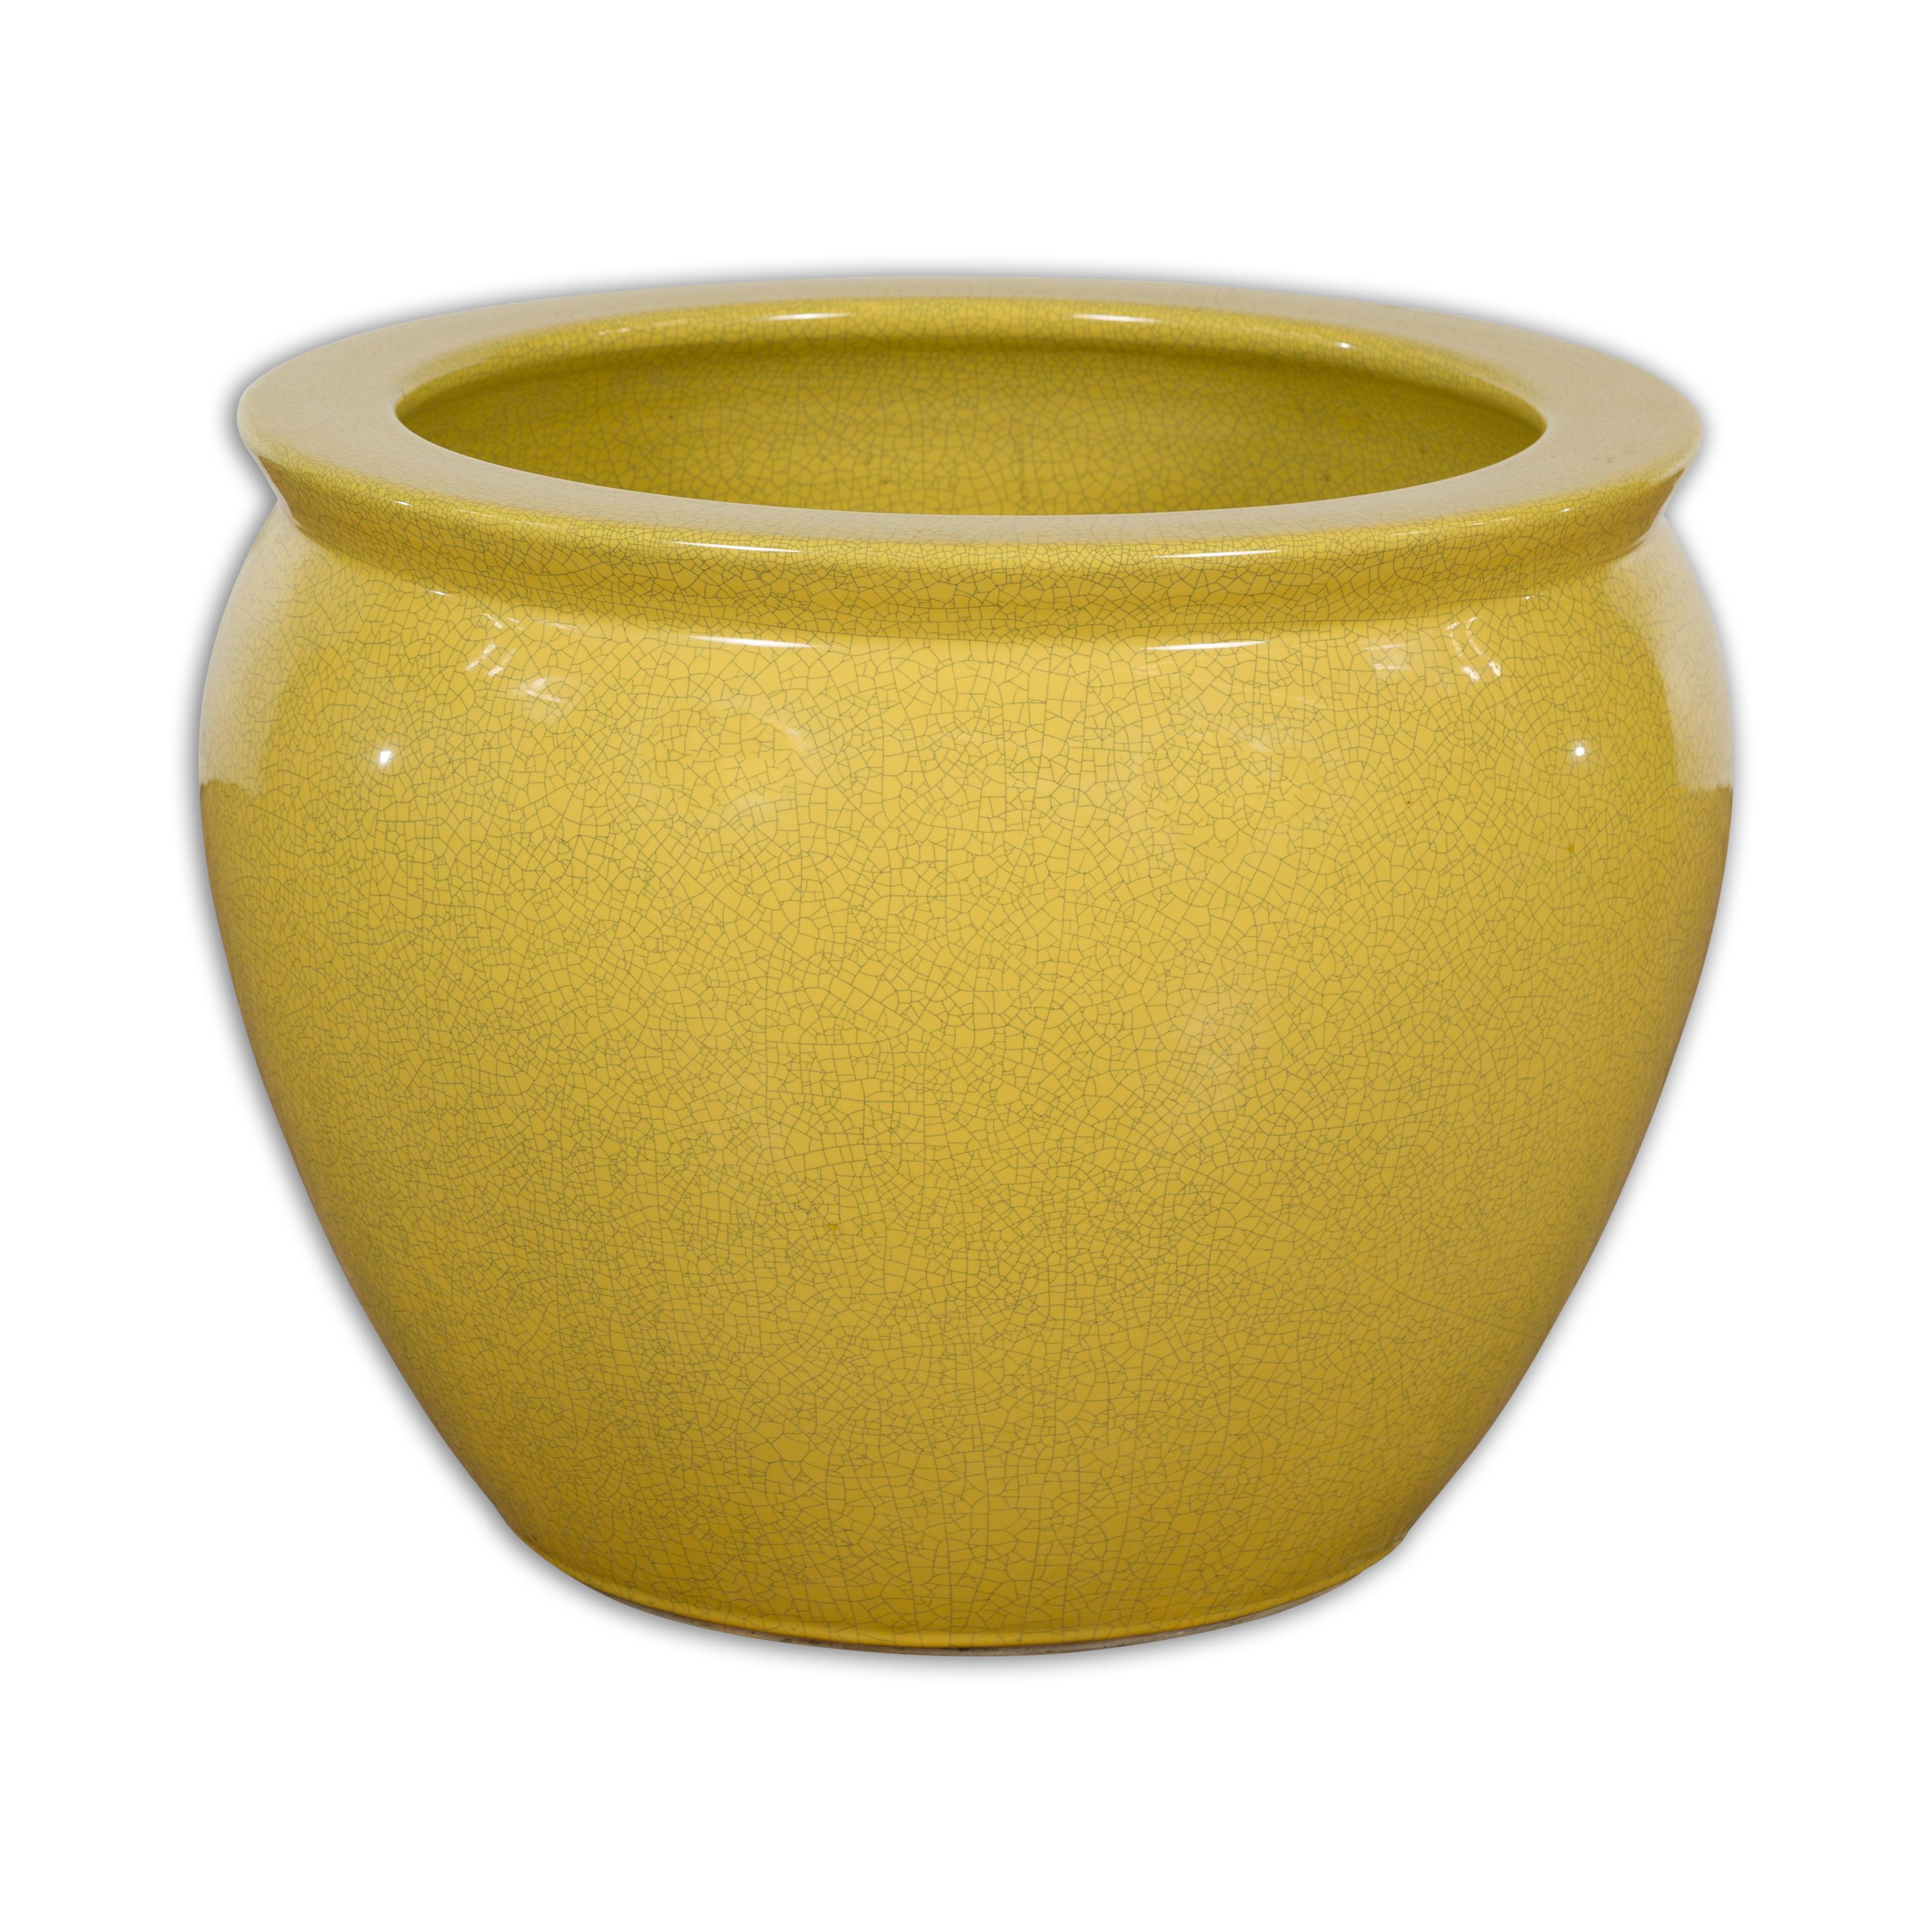 Chinese Vintage Circular Garden Planter with Yellow Crackle Glaze 11